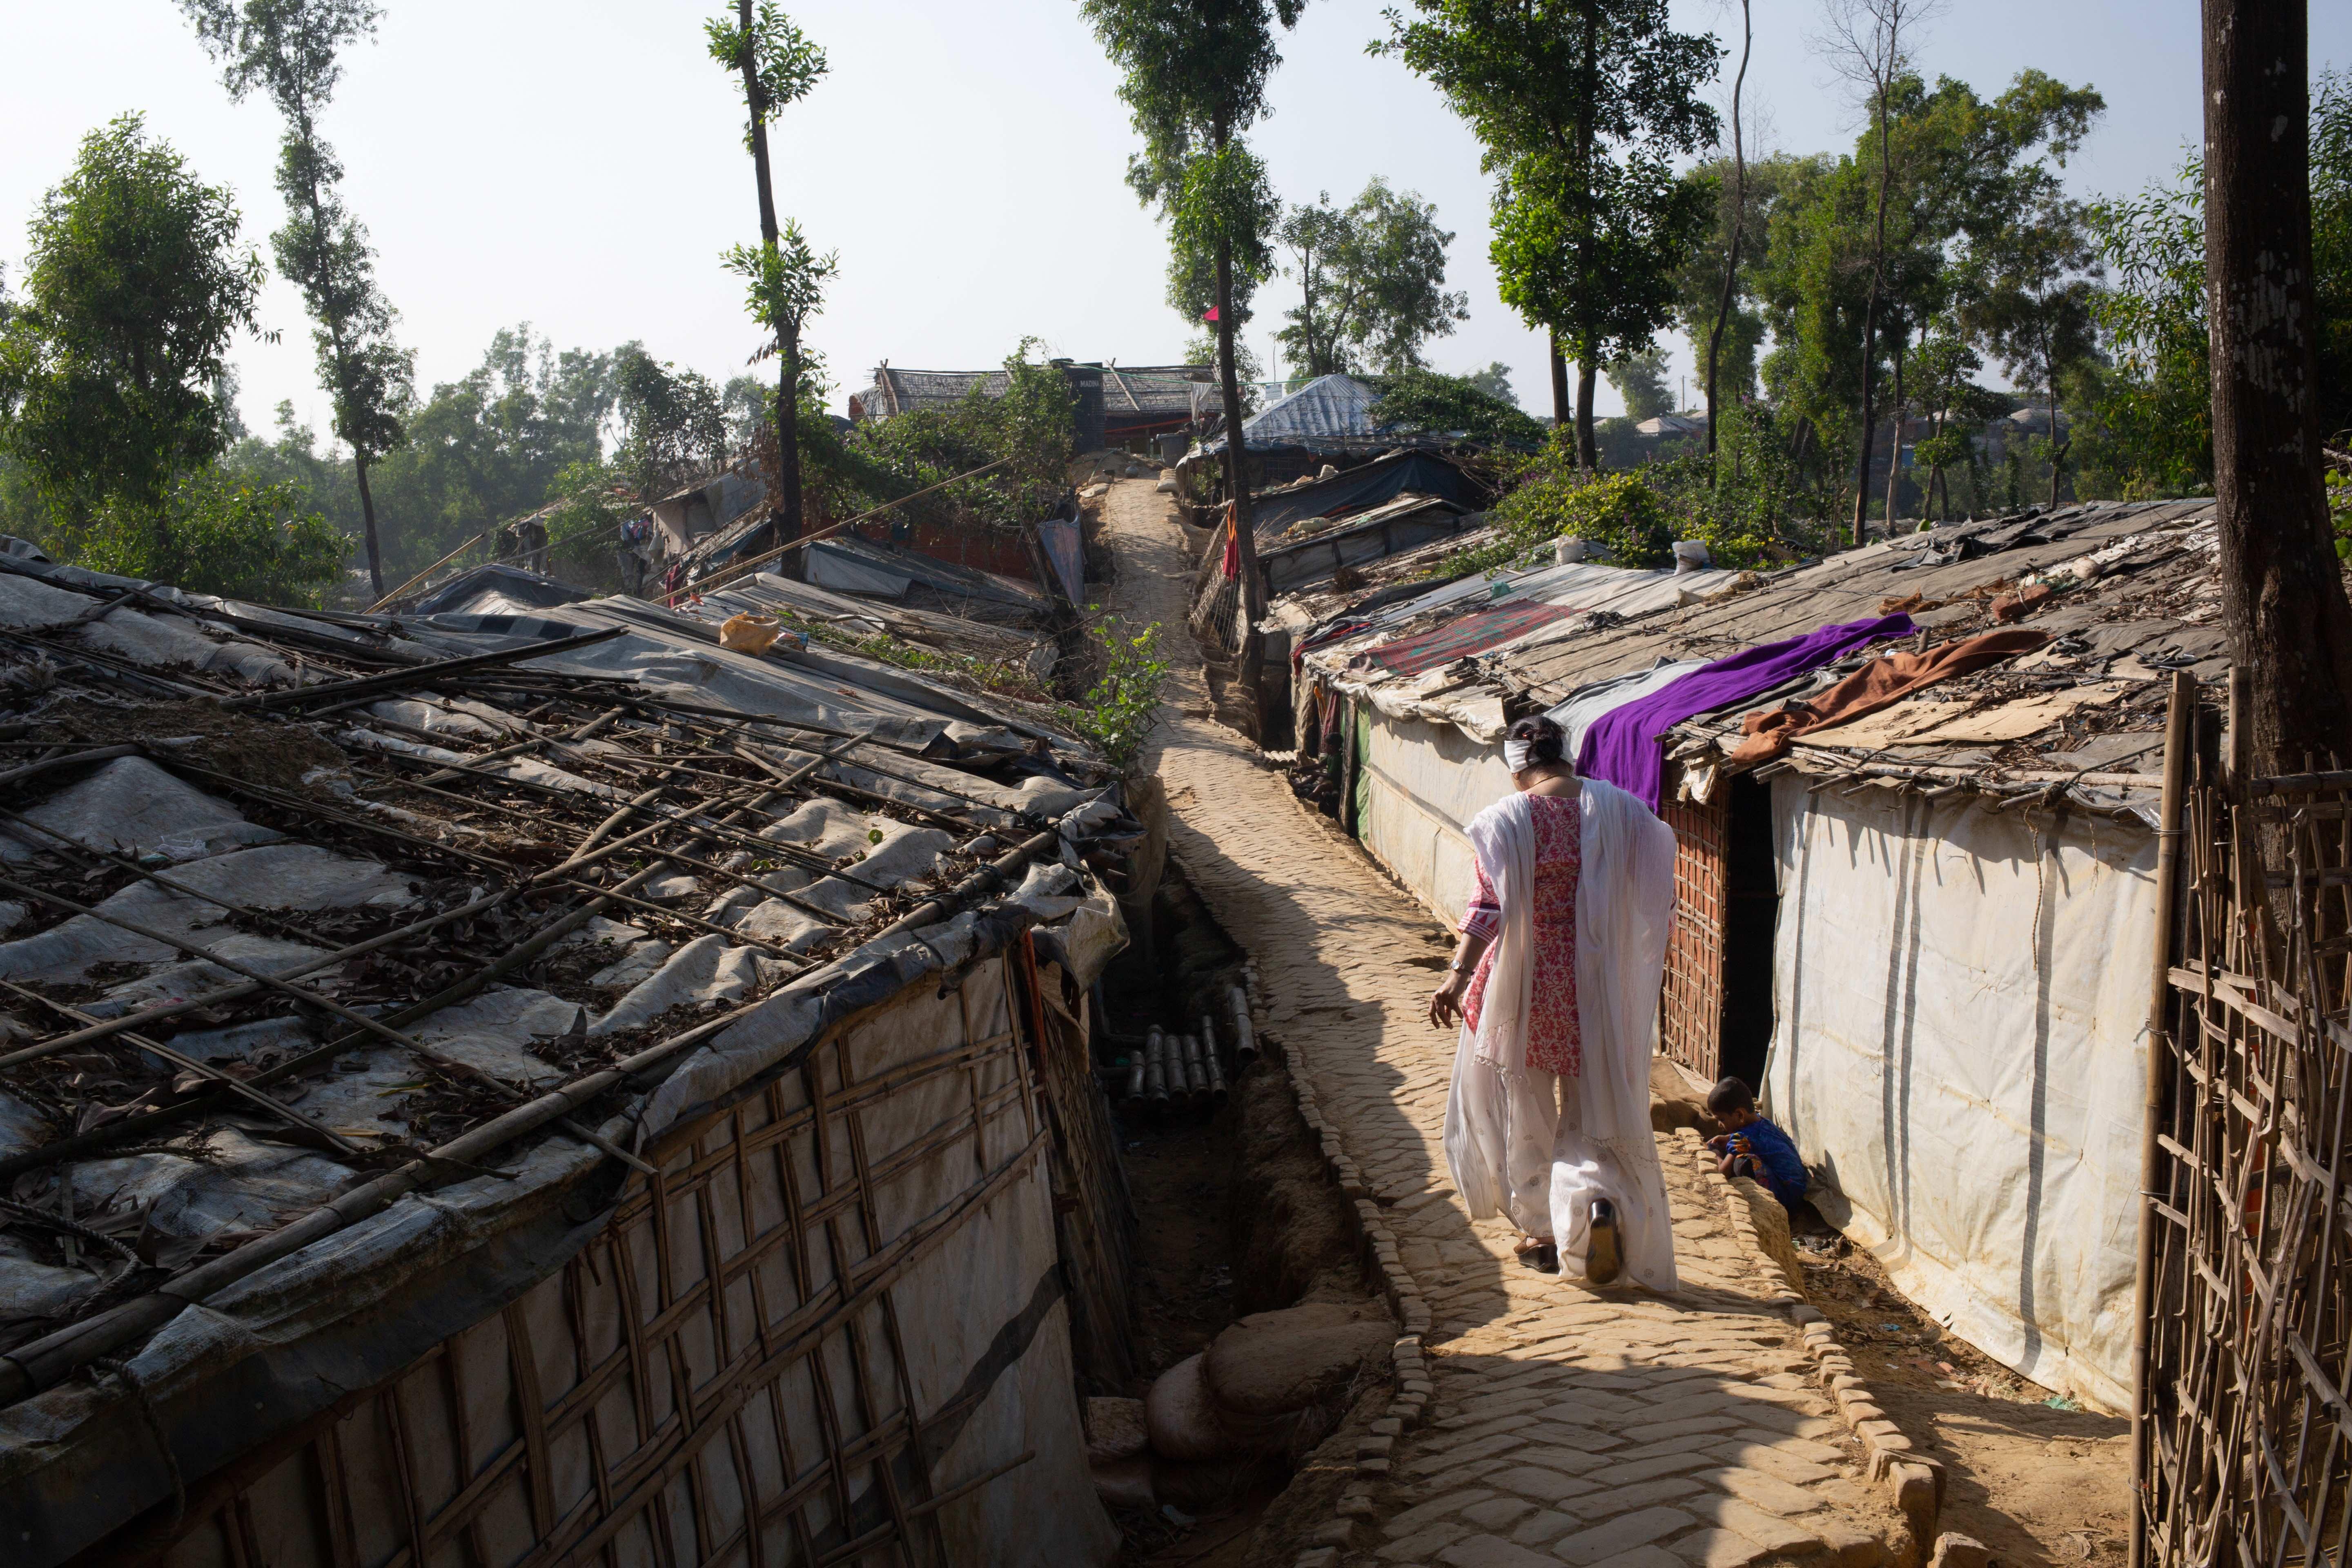 Razia Sultana walks in between a row of homes on a dust road